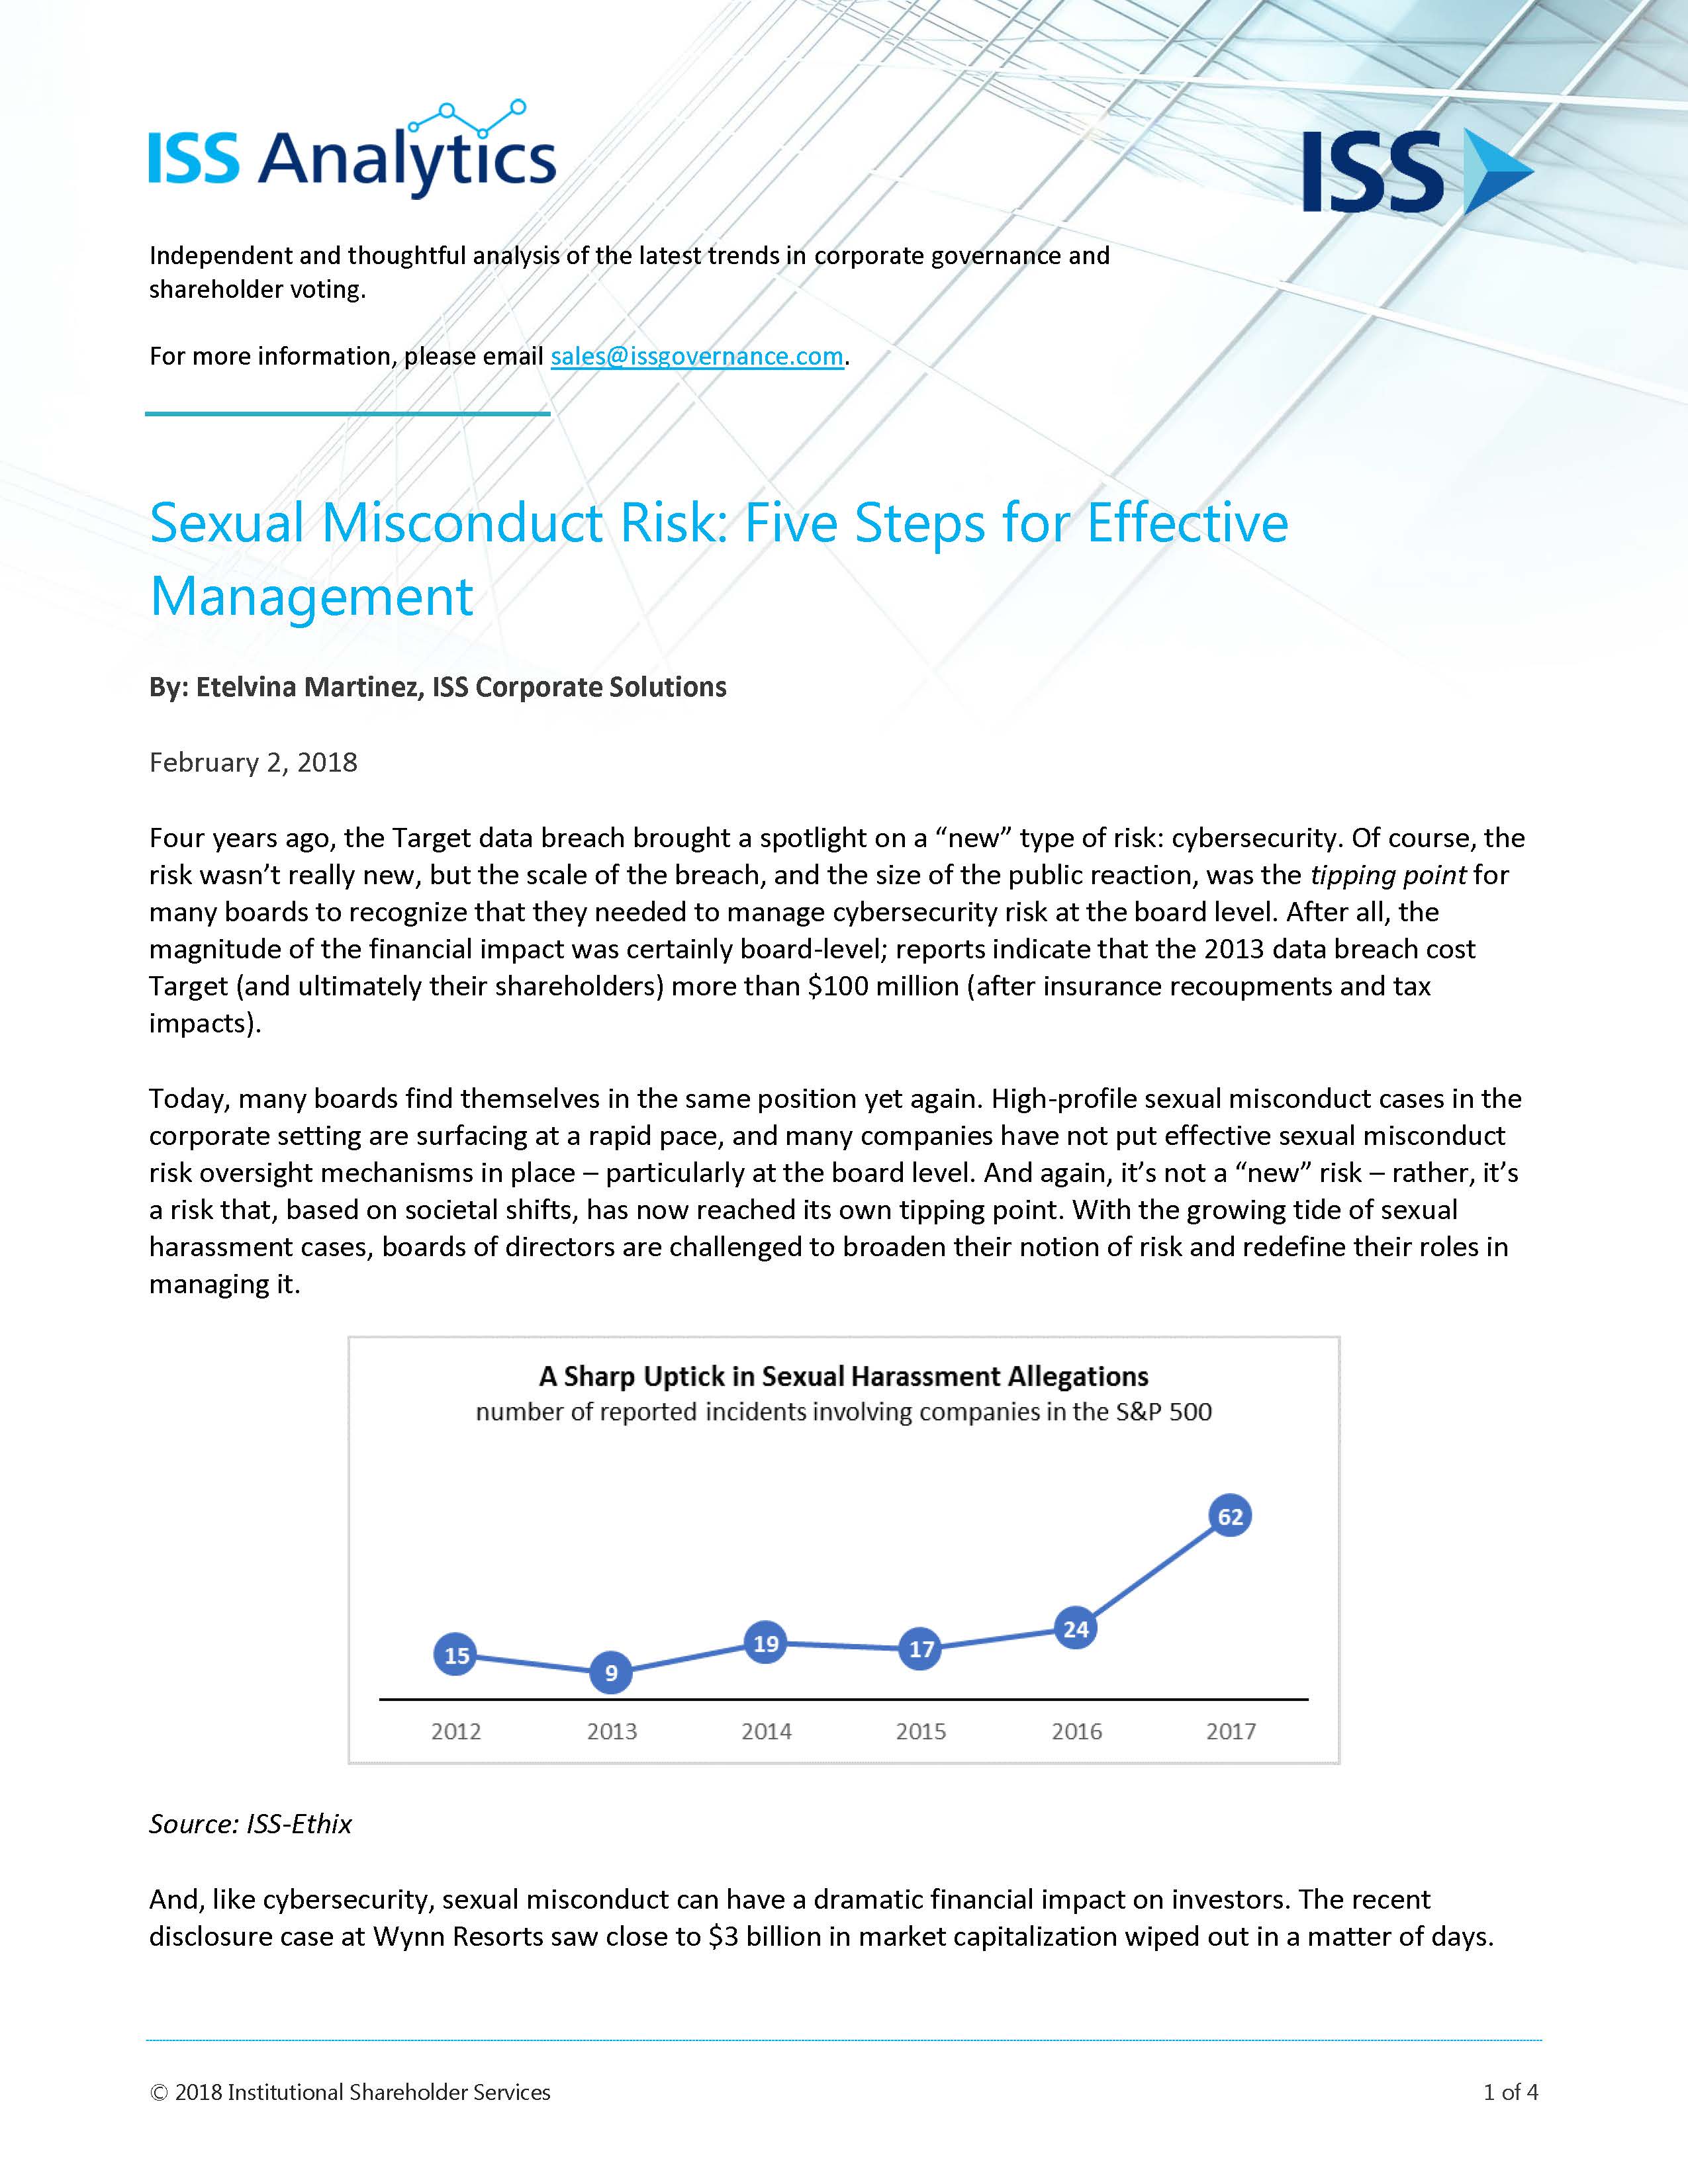 sexual-misconduct-risk-five-steps-to-effective-management_page_1